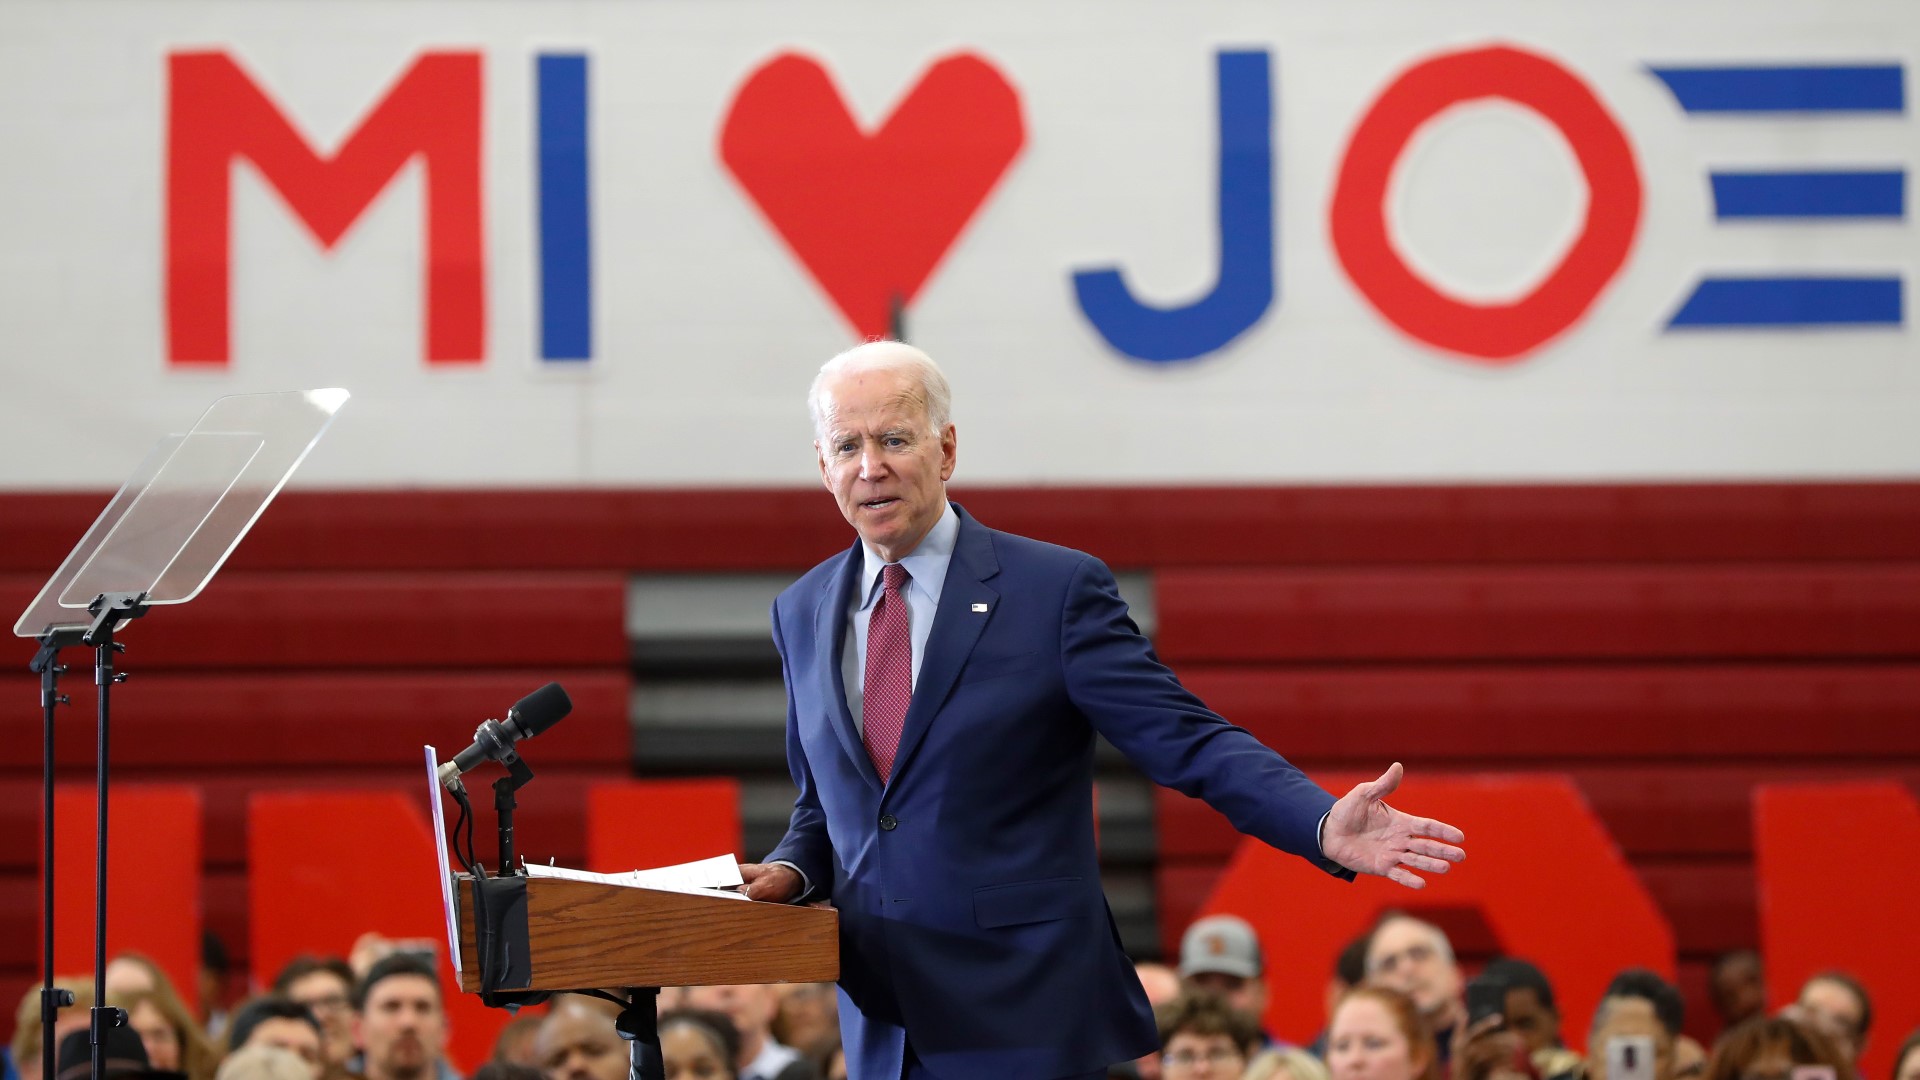 The Biden campaign announced Tuesday that the candidate will be travelling to Warren, Michigan to deliver a speech at 1:15 p.m.